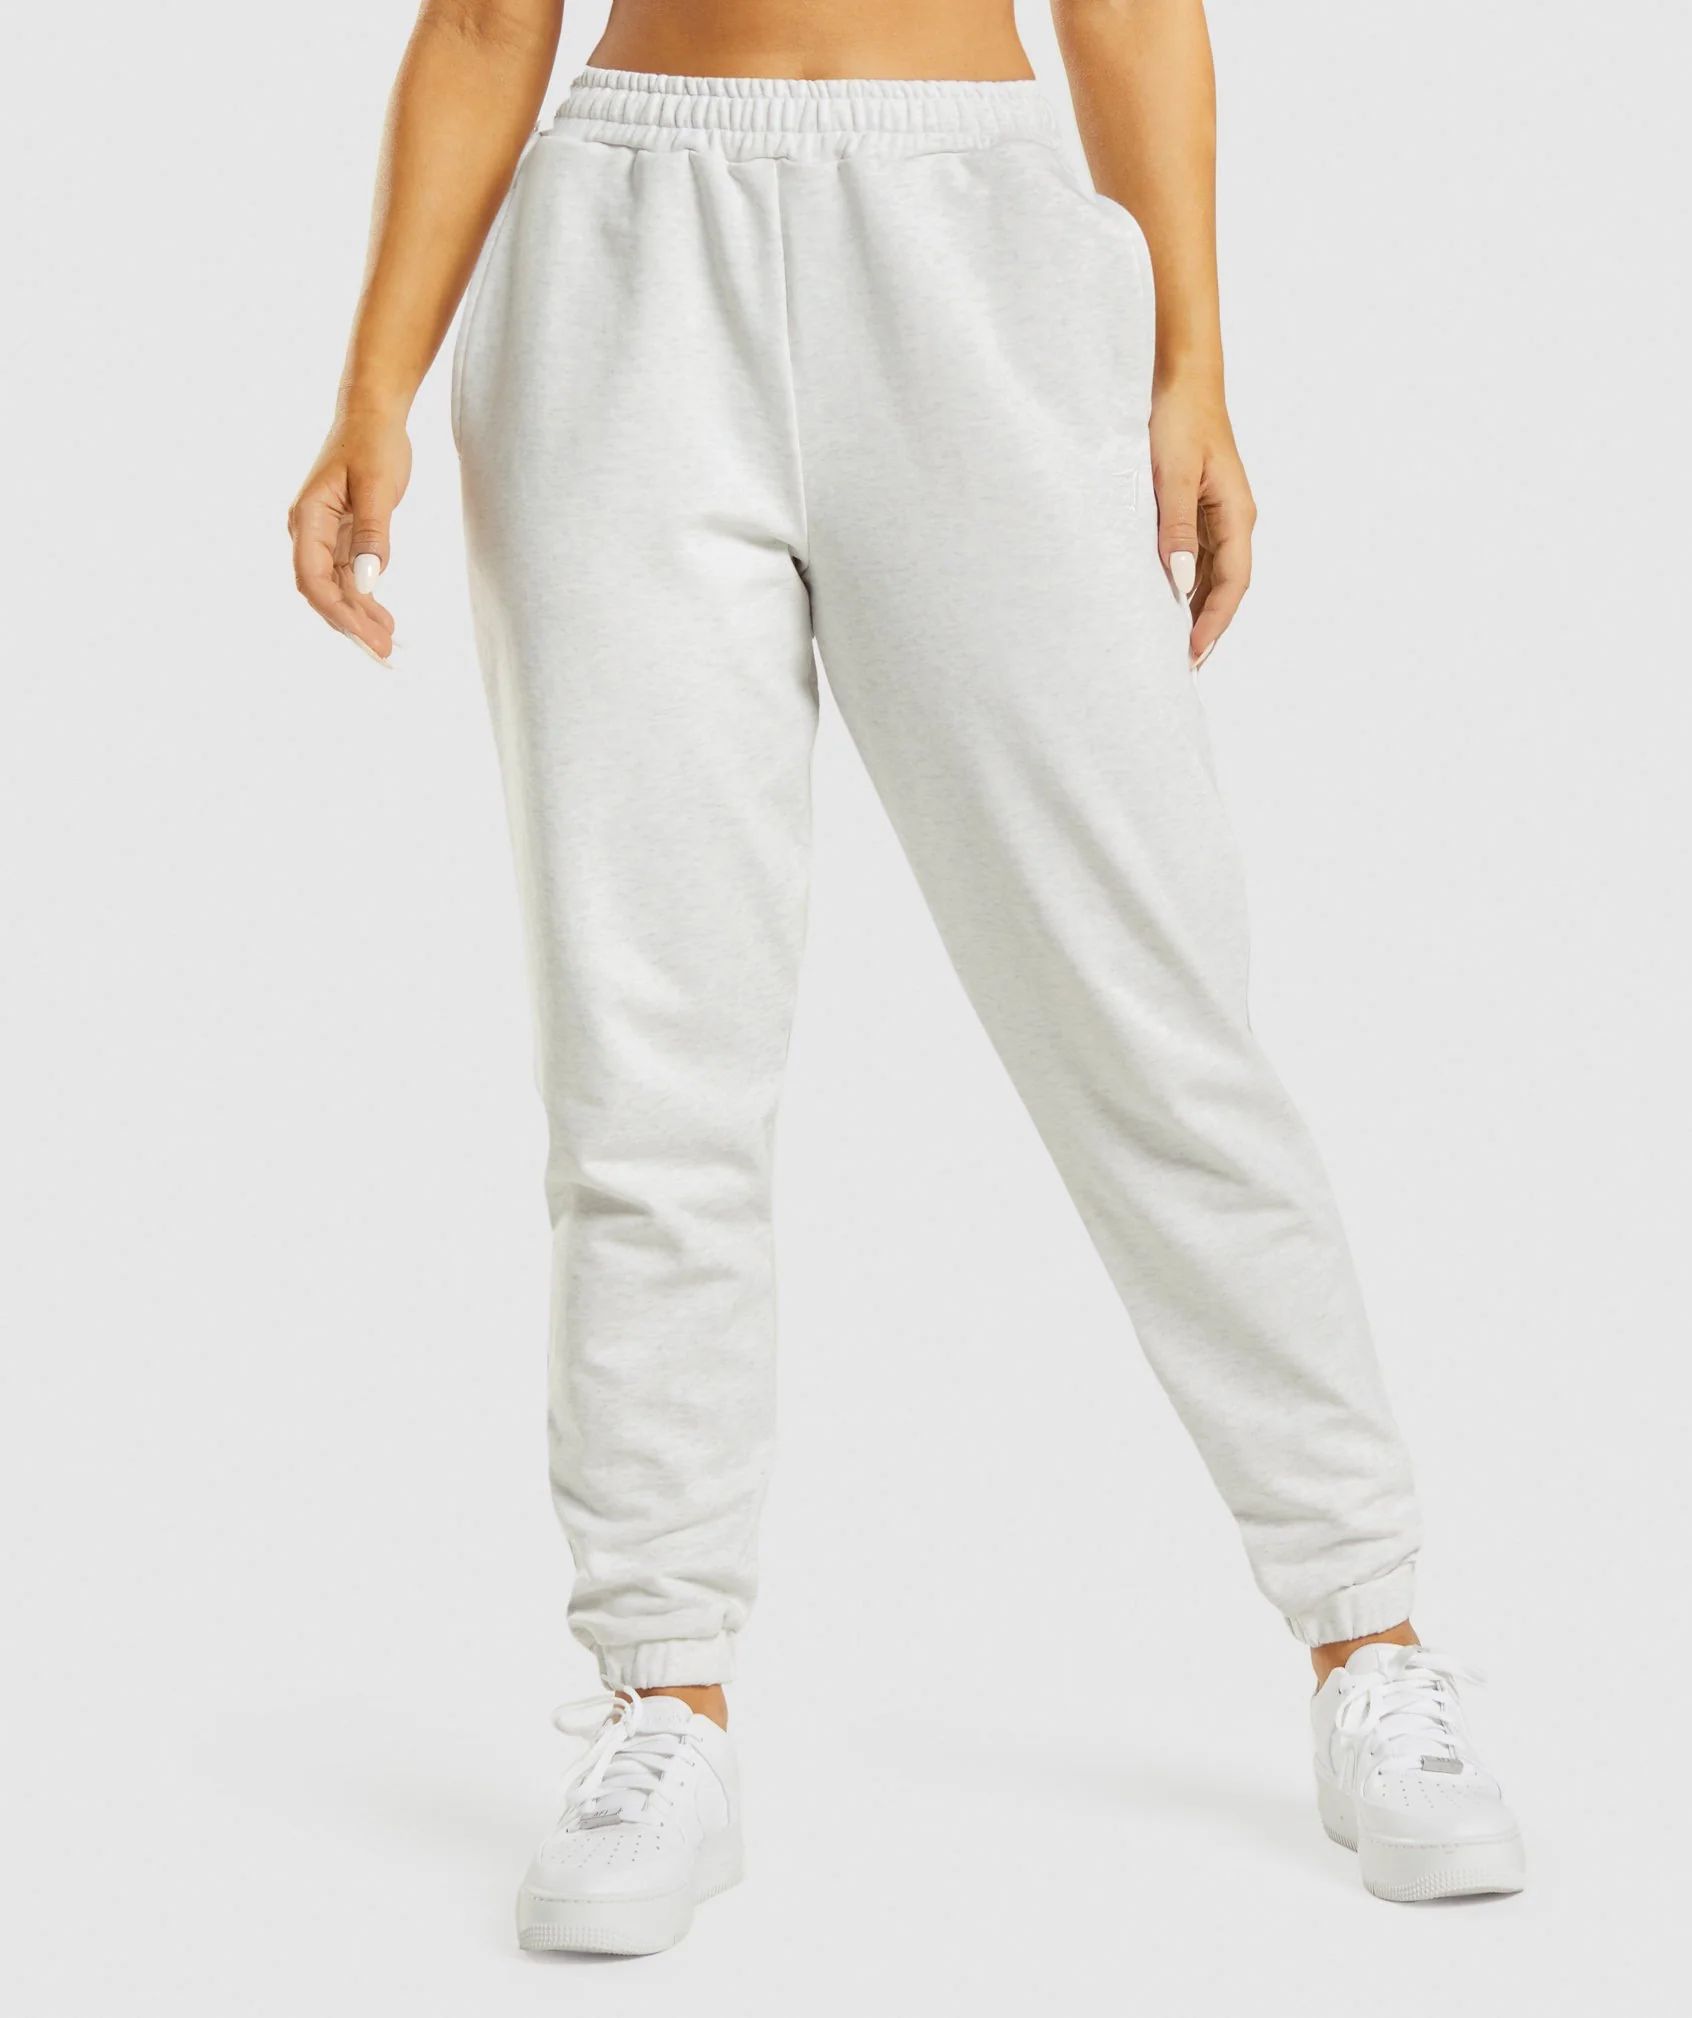 Gymshark Rest Day Sweats Joggers - White Marl | Gymshark CA